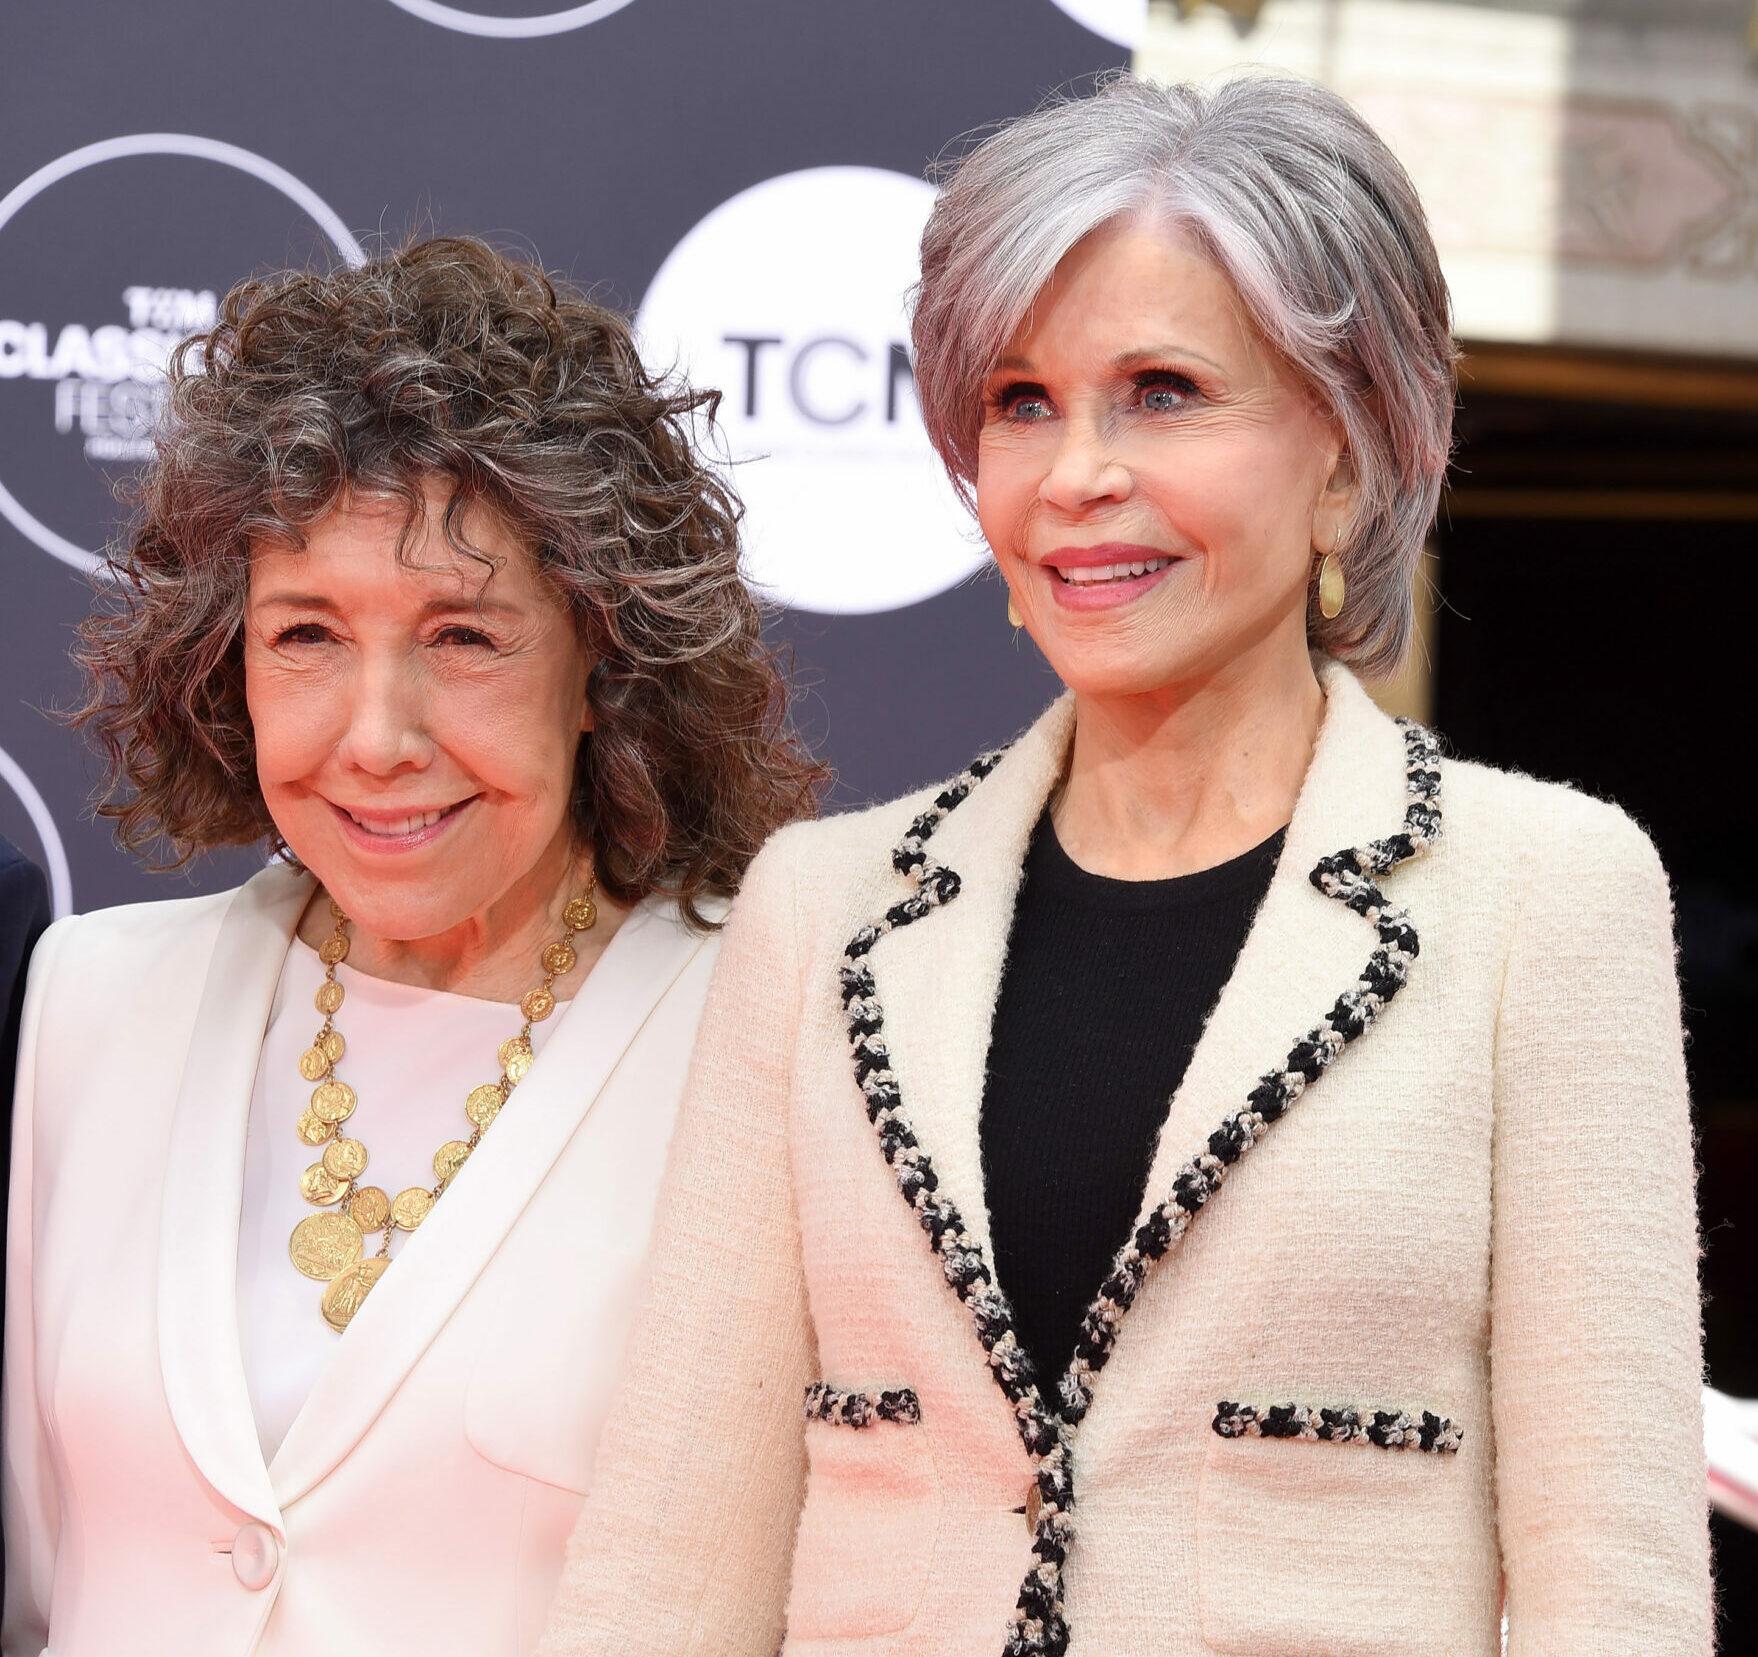 Lily Tomlin Hand and Footprint ceremony held at the TCL Chinese Theatre on April 22, 2022 in Hollywood, Pictured: Lily Tomlin and Jane Fonda.